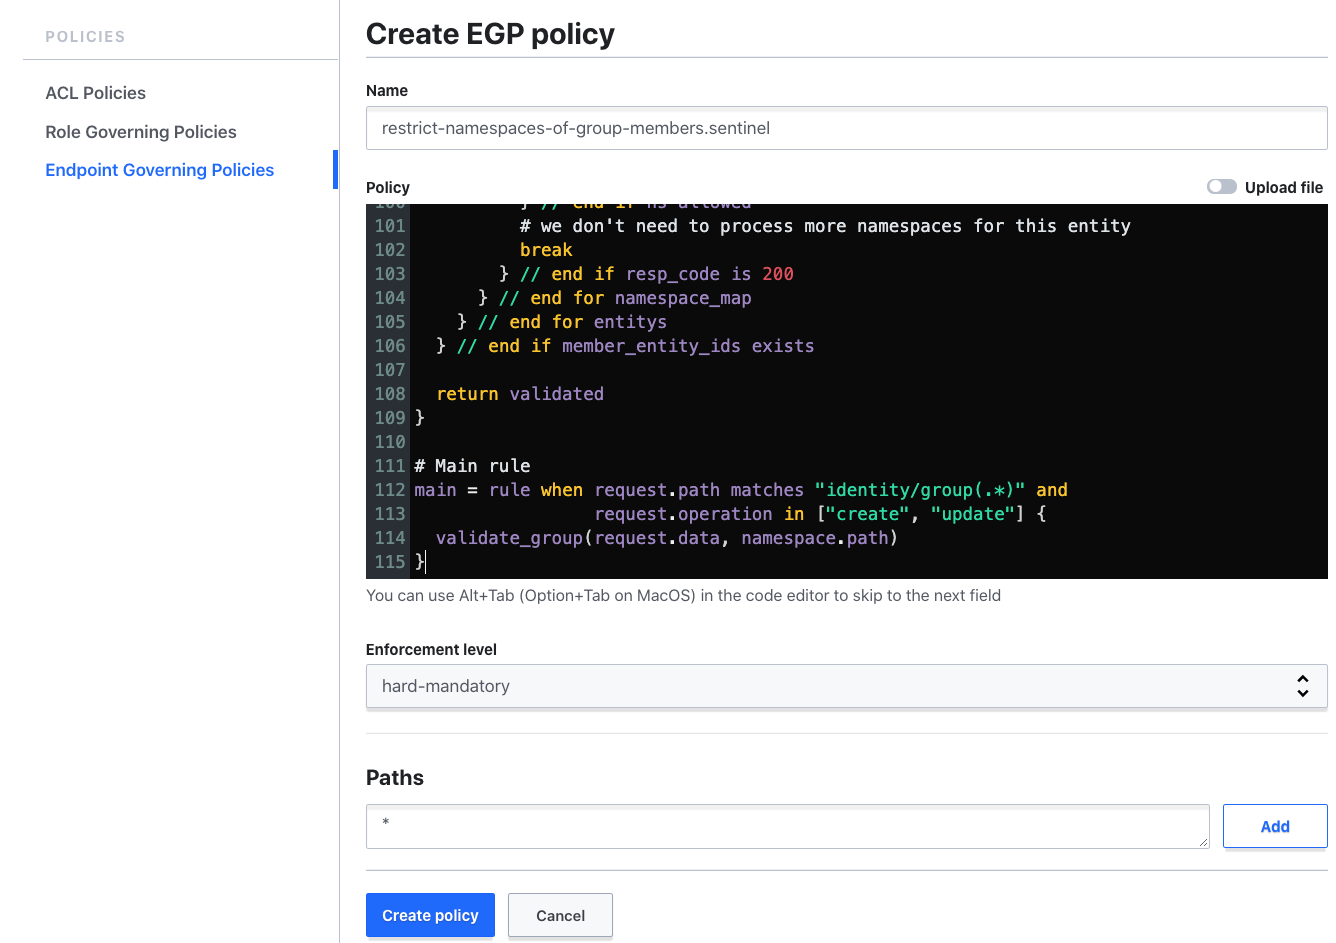 Creating the primary policy in the UI